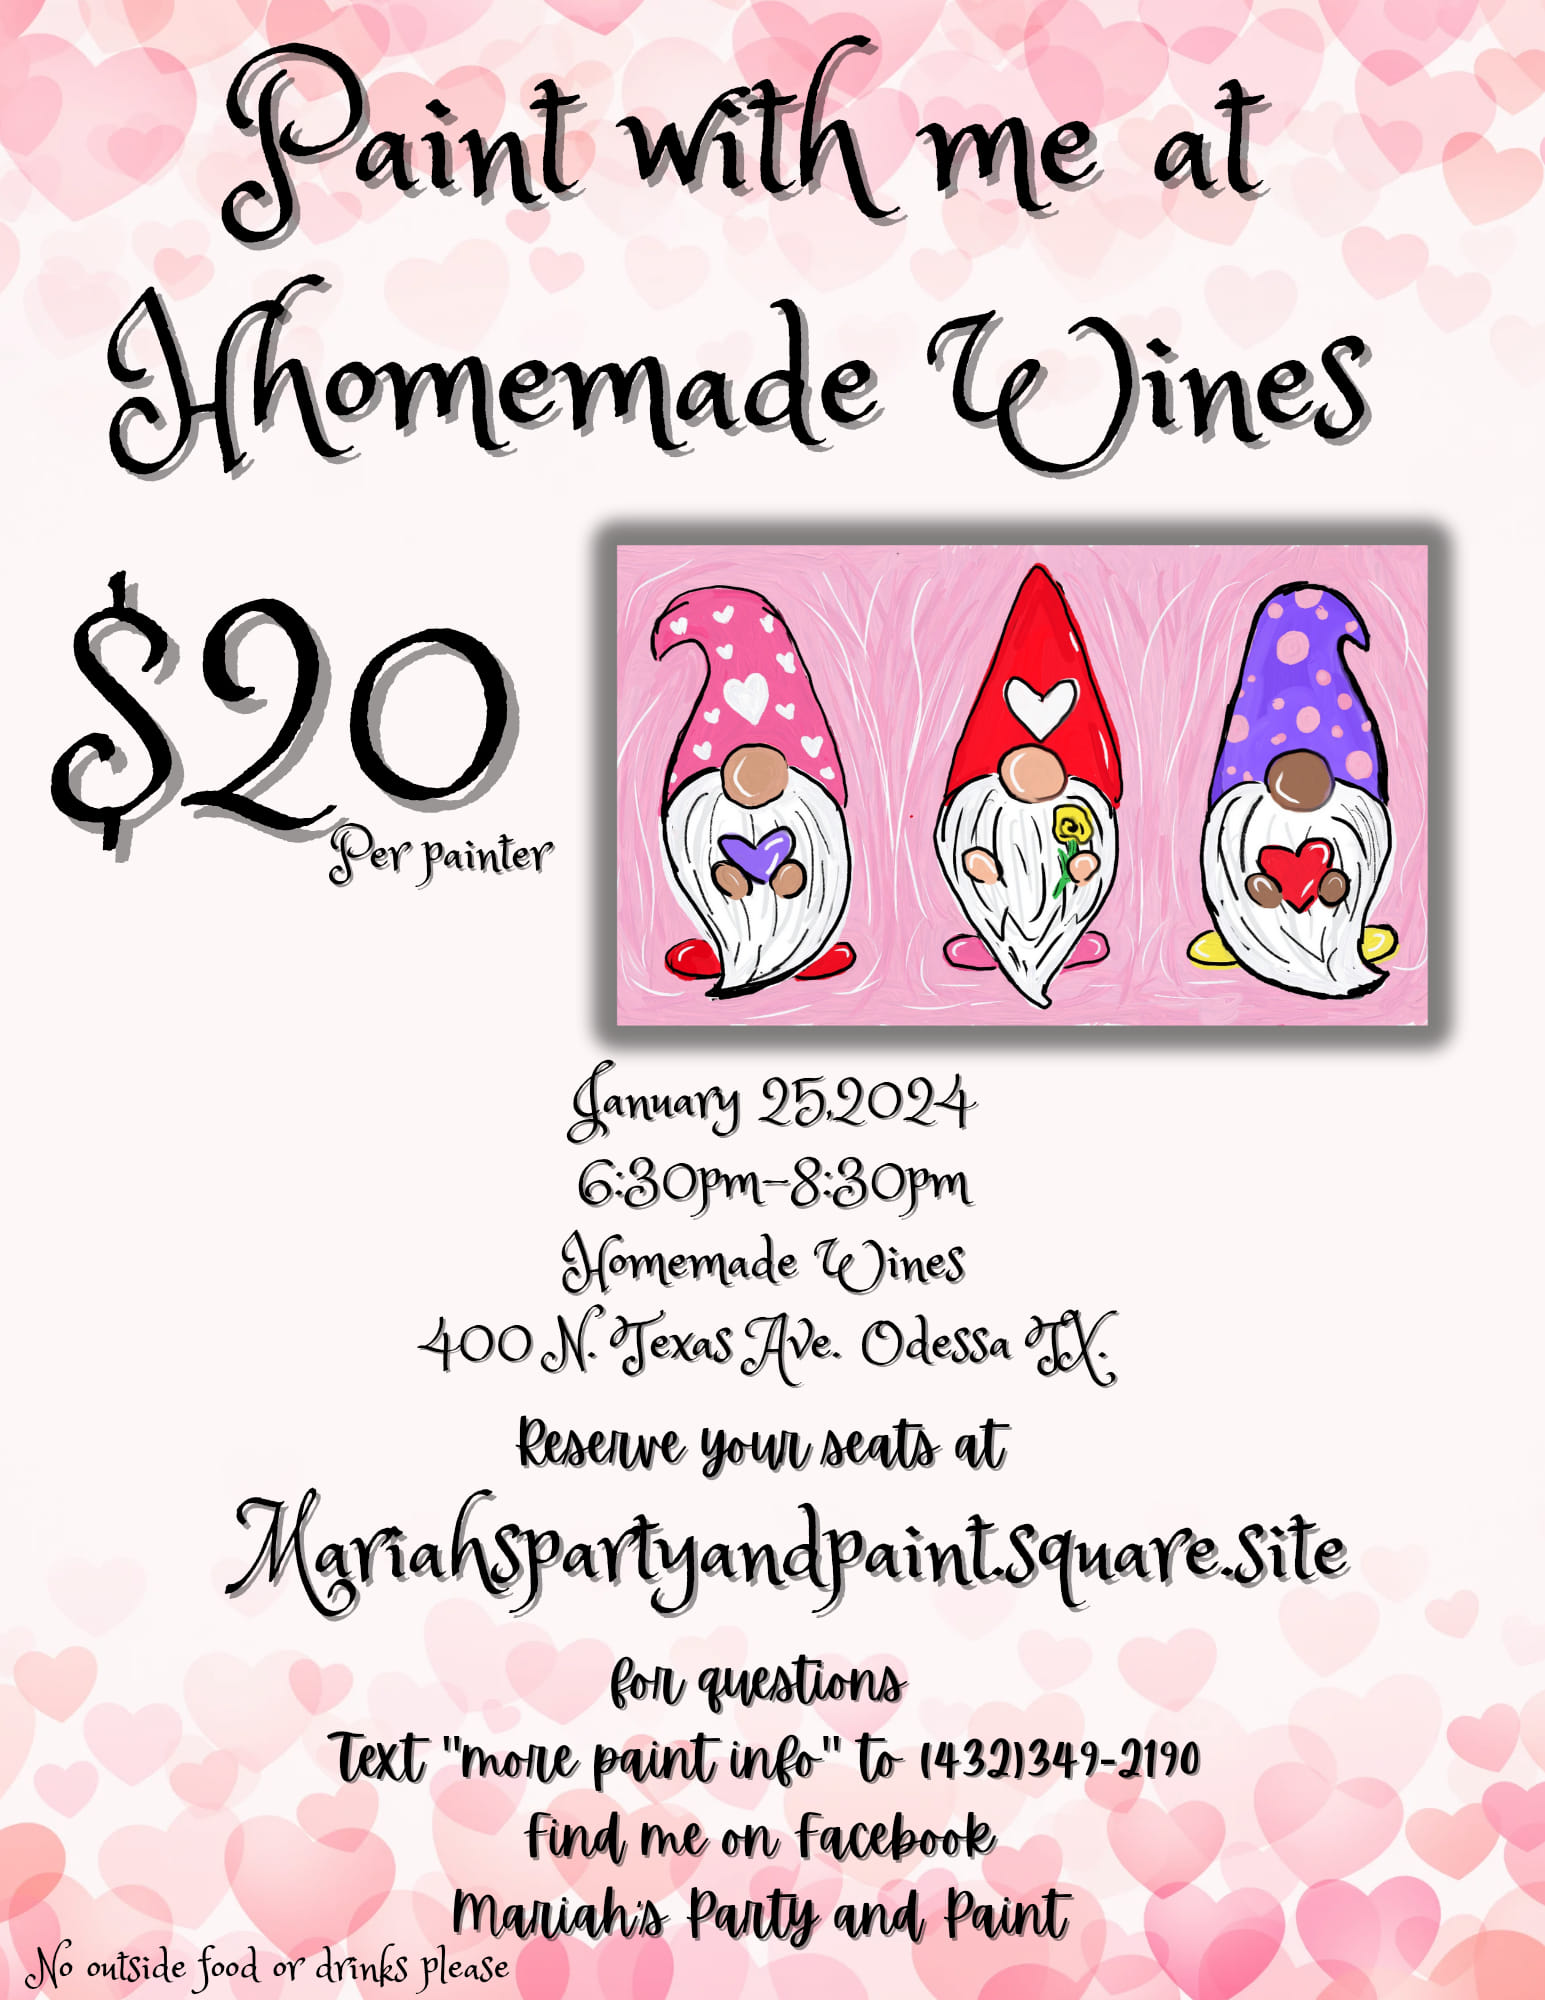 Gnome Painting Class at Homemade Wines in Downtown Odessa, TX